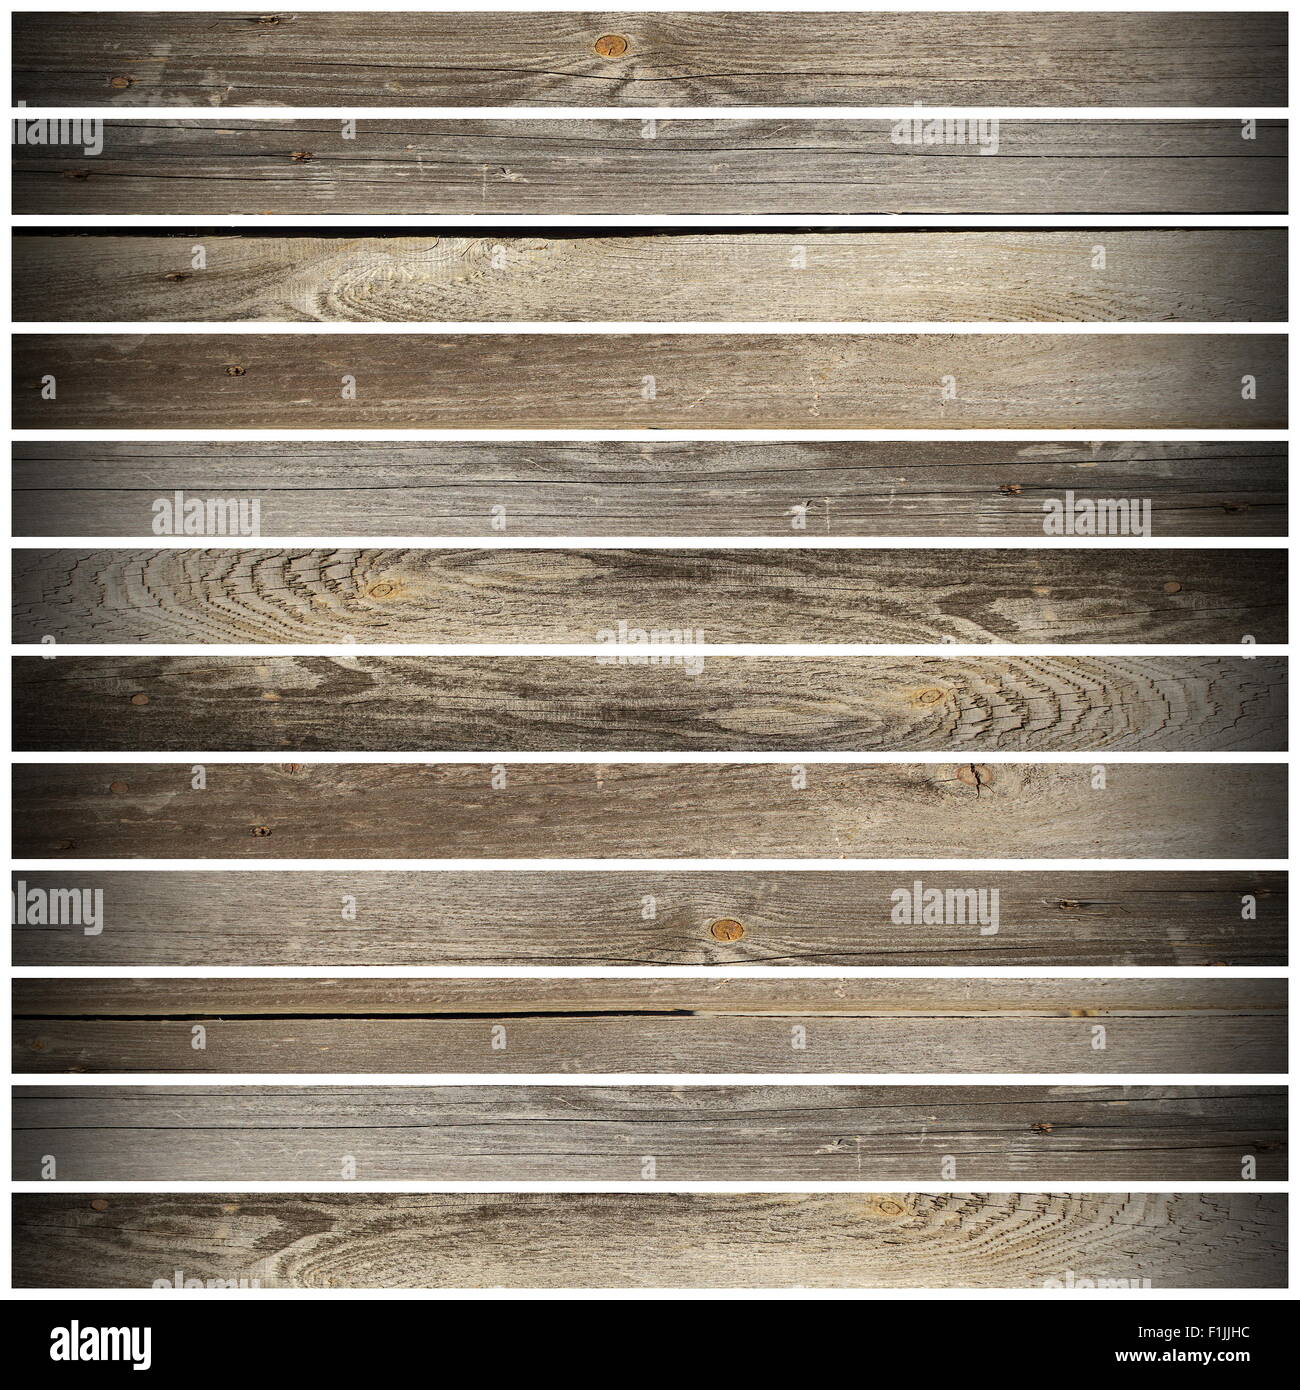 background with old wooden planks over white forming floor design Stock Photo